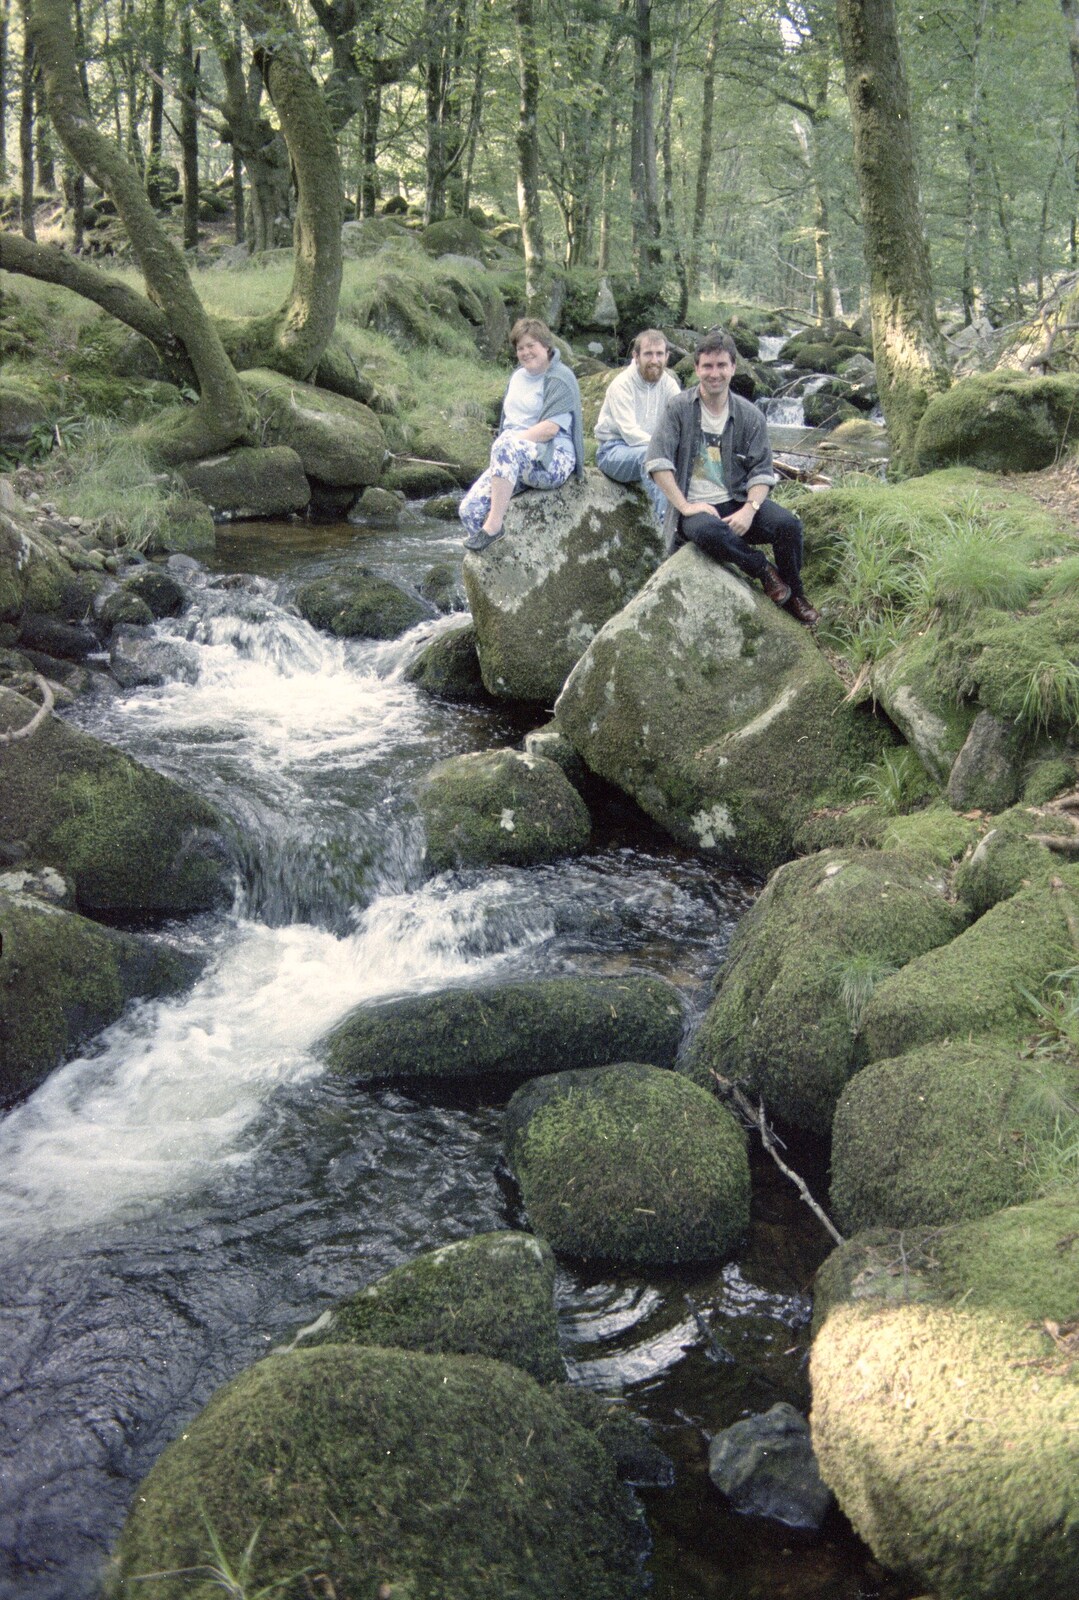 Sitting by a river from A Trip to Mutton Cove, Plymouth, Devon - 15th May 1993